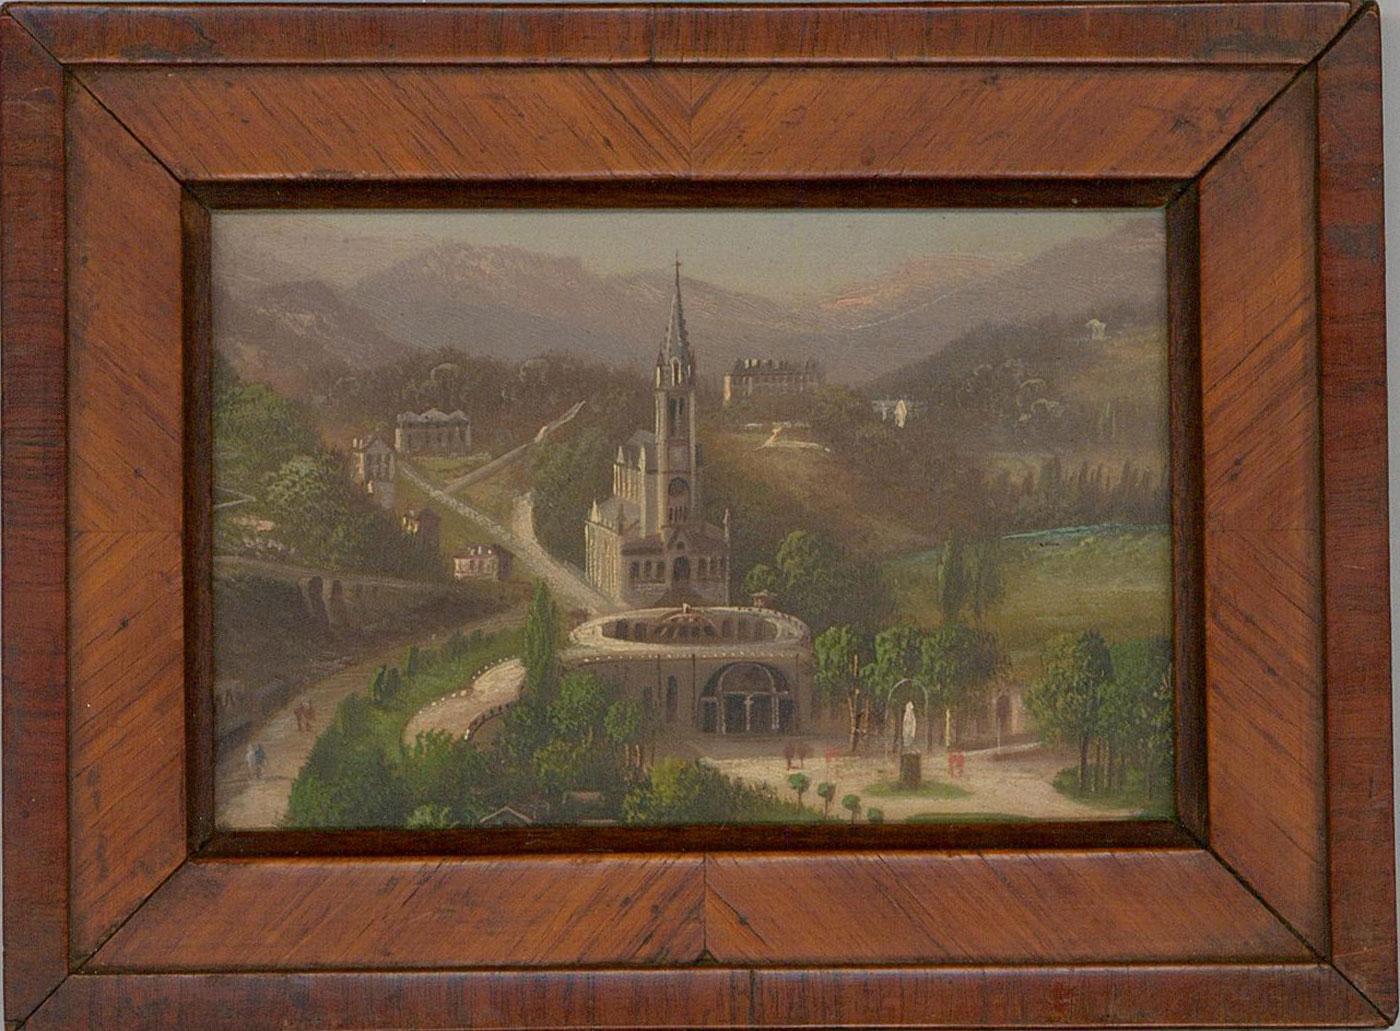 An intricately painted miniature landscape of the Sanctuary of Our Lady of Lourdes in France. Signed by Louis Ritschard 1817-1904 (under the alias Hubert Sattler). Beautifully presented in its original handmade walnut frame, as shown.


On panel.